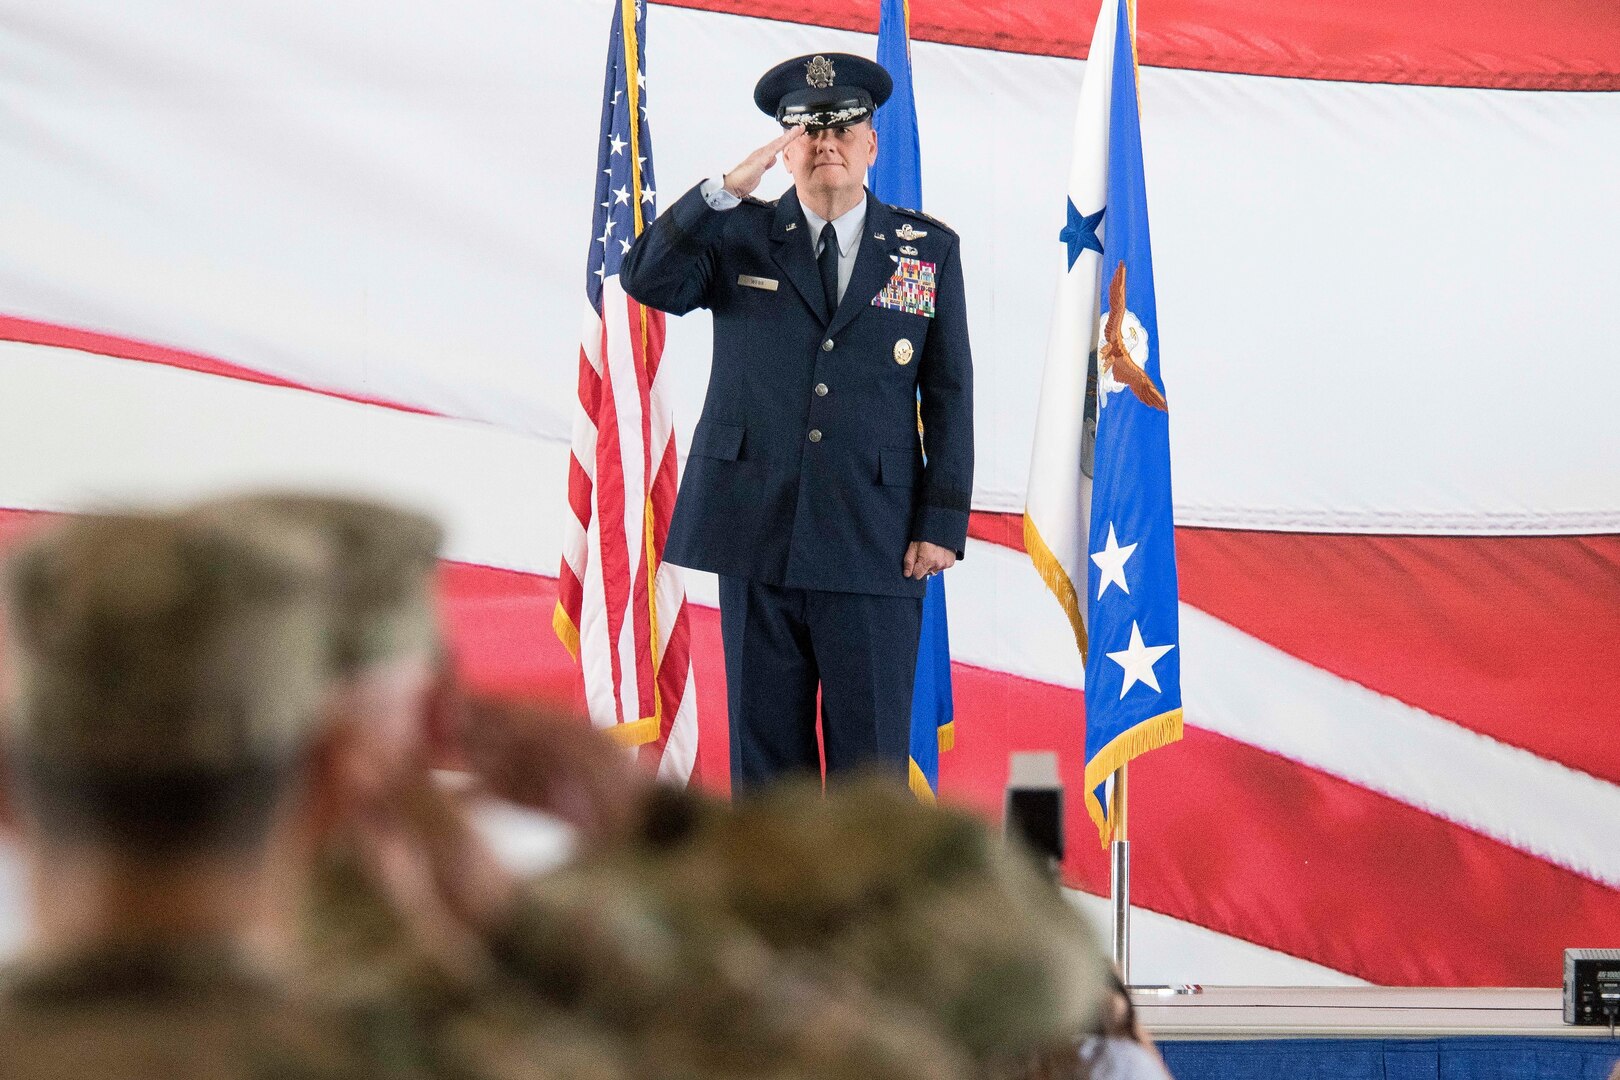 U.S. Air Force Lt. Gen. Brad Webb, commander of Air Education and Training Command, renders his first salute to the men and women of the First Command during AETC’s change of command ceremony at Joint Base San Antonio-Randolph July 26. AETC operates more than 1,400 trainer, fighter and mobility aircraft, 23 wings, 10 bases and five geographically separated groups.